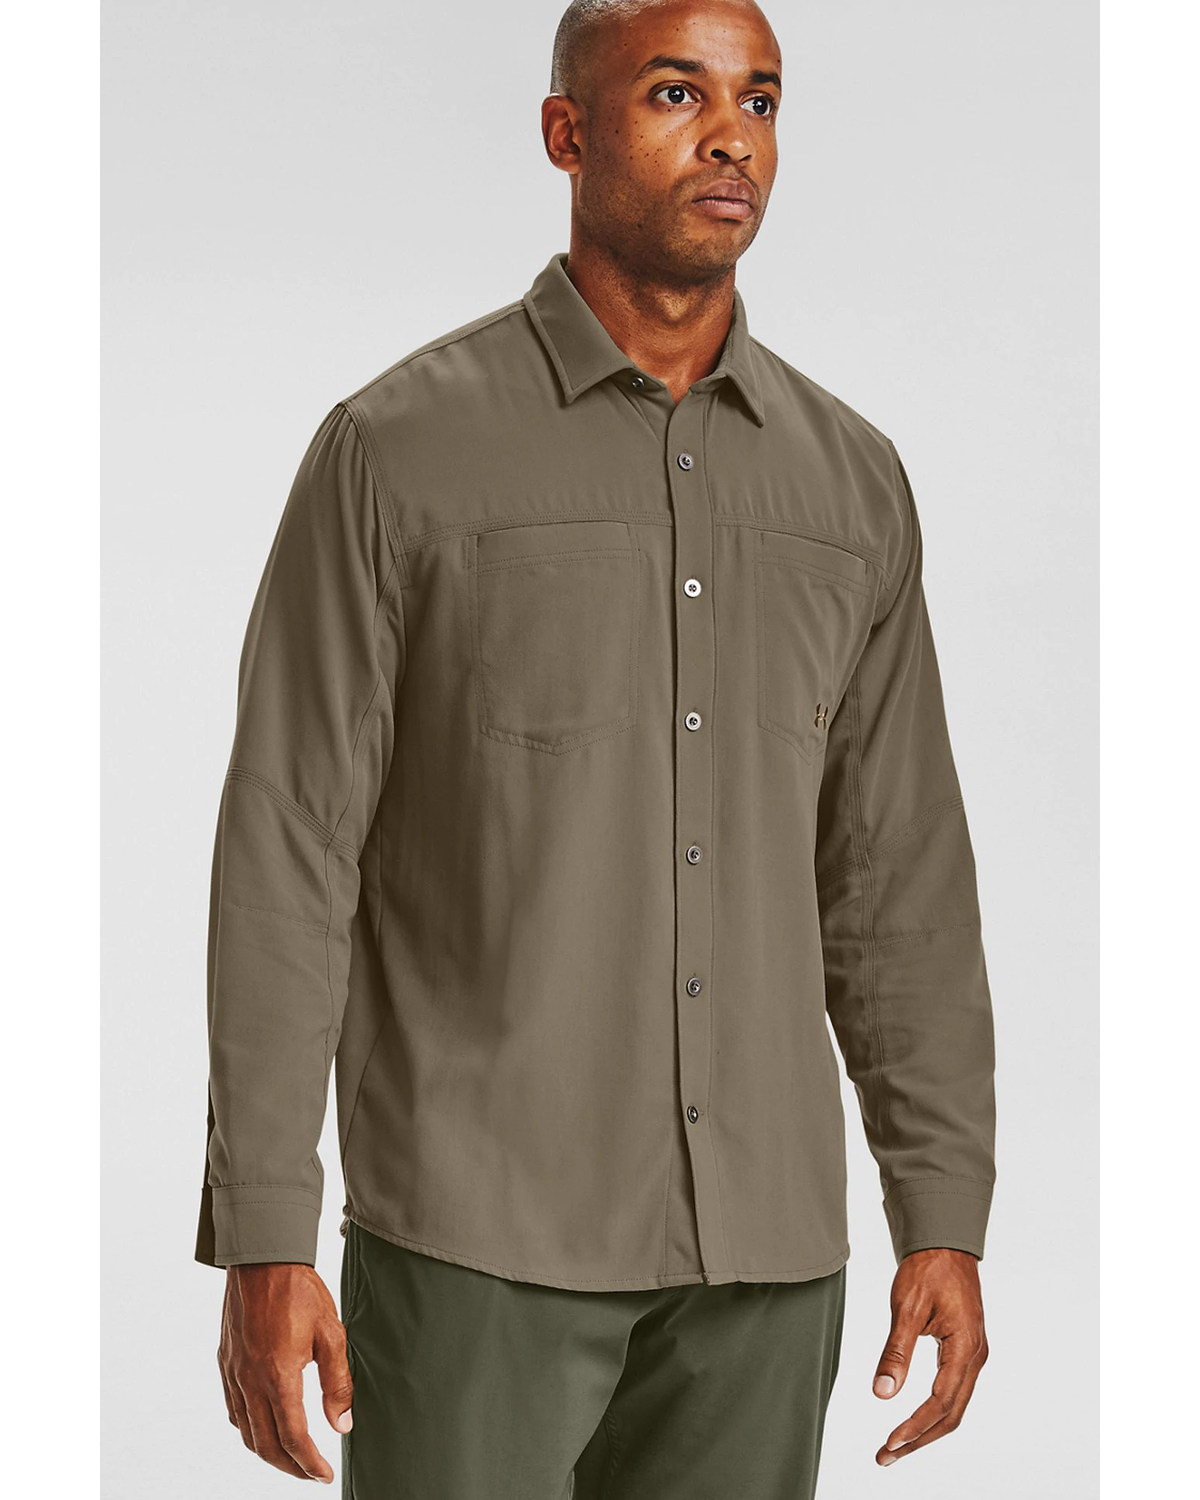 Under Armour Men's Green Payload Button ...